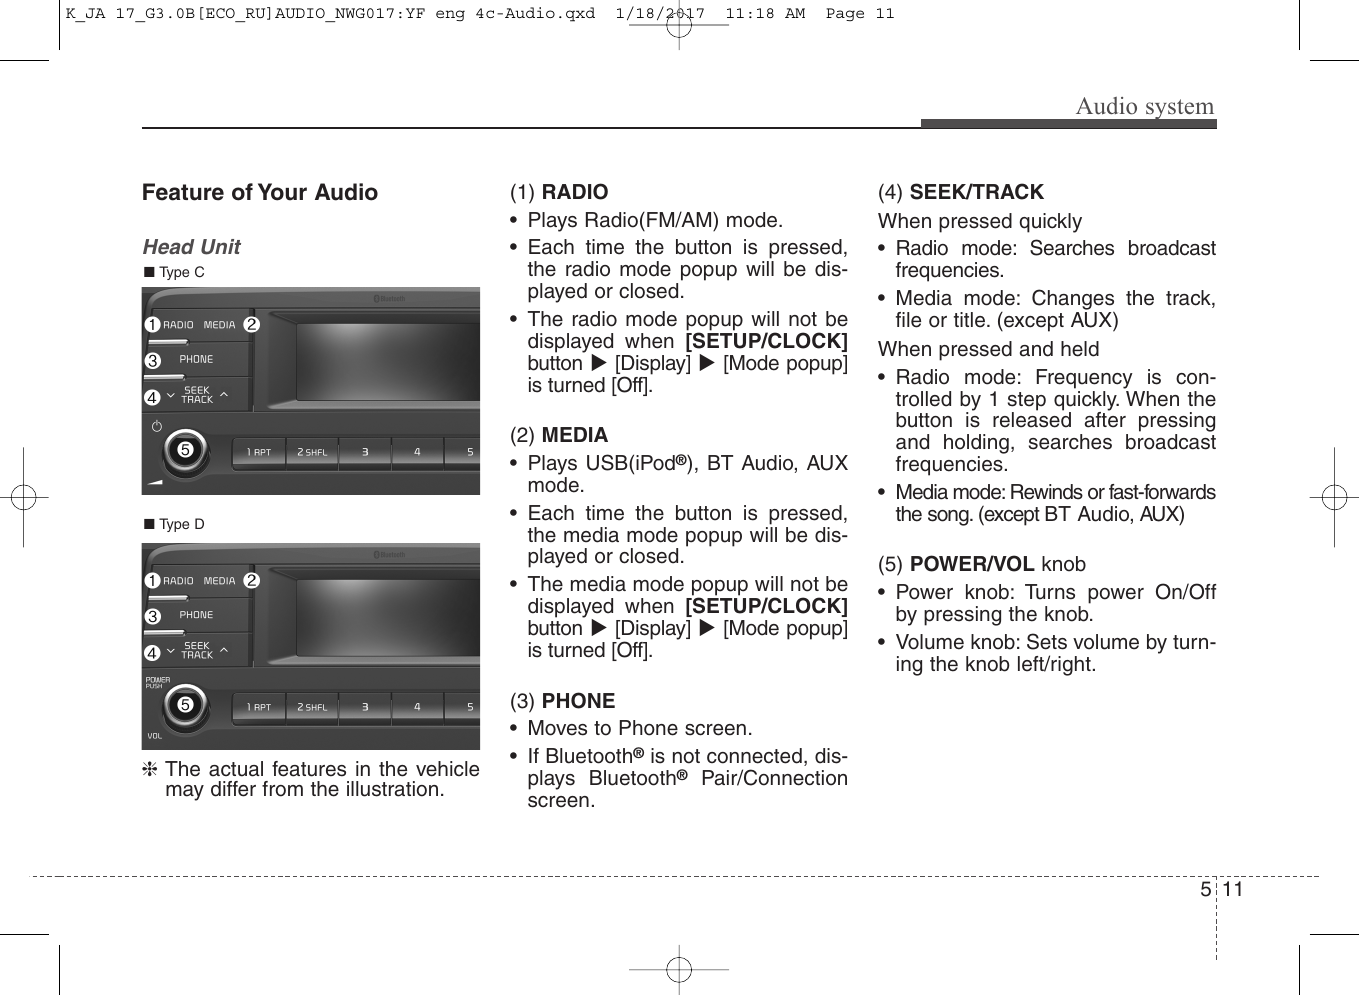 Audio system115Feature of Your AudioHead Unit❈The actual features in the vehiclemay differ from the illustration.(1) RADIO• Plays Radio(FM/AM) mode.• Each time the button is pressed,the radio mode popup will be dis-played or closed.• The radio mode popup will not bedisplayed when [SETUP/CLOCK]button [Display] [Mode popup]is turned [Off].(2) MEDIA• Plays USB(iPod®), BT Audio, AUXmode.• Each time the button is pressed,the media mode popup will be dis-played or closed.• The media mode popup will not bedisplayed when [SETUP/CLOCK]button [Display] [Mode popup]is turned [Off].(3) PHONE• Moves to Phone screen.• If Bluetooth®is not connected, dis-plays Bluetooth®Pair/Connectionscreen.(4) SEEK/TRACKWhen pressed quickly• Radio mode: Searches broadcastfrequencies.• Media mode: Changes the track,file or title. (except AUX)When pressed and held• Radio mode: Frequency is con-trolled by 1 step quickly. When thebutton is released after pressingand holding, searches broadcastfrequencies.• Media mode: Rewinds or fast-forwardsthe song. (except BT Audio, AUX)(5) POWER/VOL knob• Power knob: Turns power On/Offby pressing the knob.• Volume knob: Sets volume by turn-ing the knob left/right.■ Type D■ Type CK_JA 17_G3.0B[ECO_RU]AUDIO_NWG017:YF eng 4c-Audio.qxd  1/18/2017  11:18 AM  Page 11